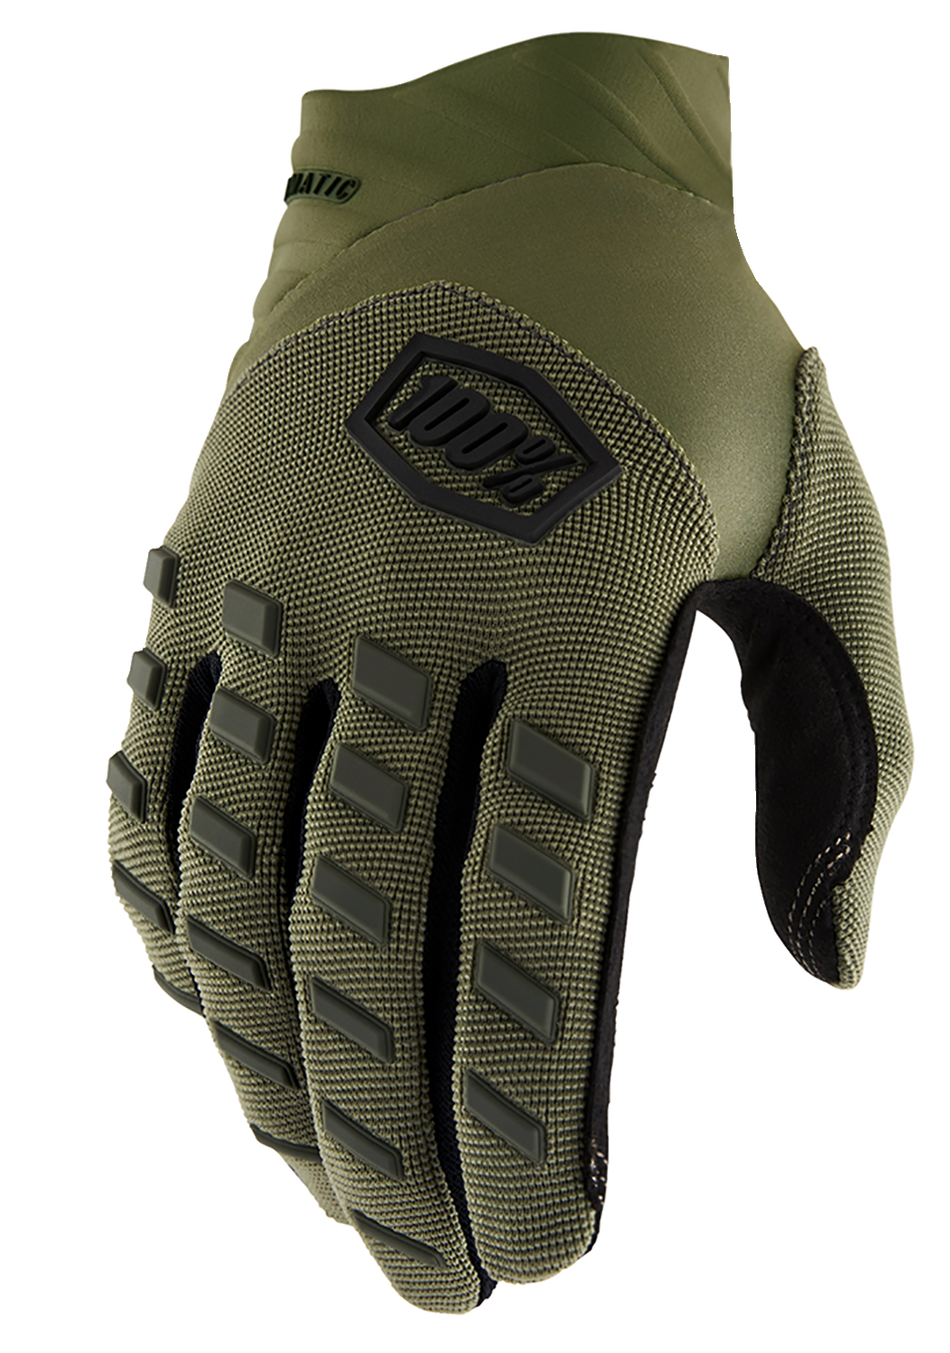 100% Airmatic Gloves - Green - Large 10000-00037